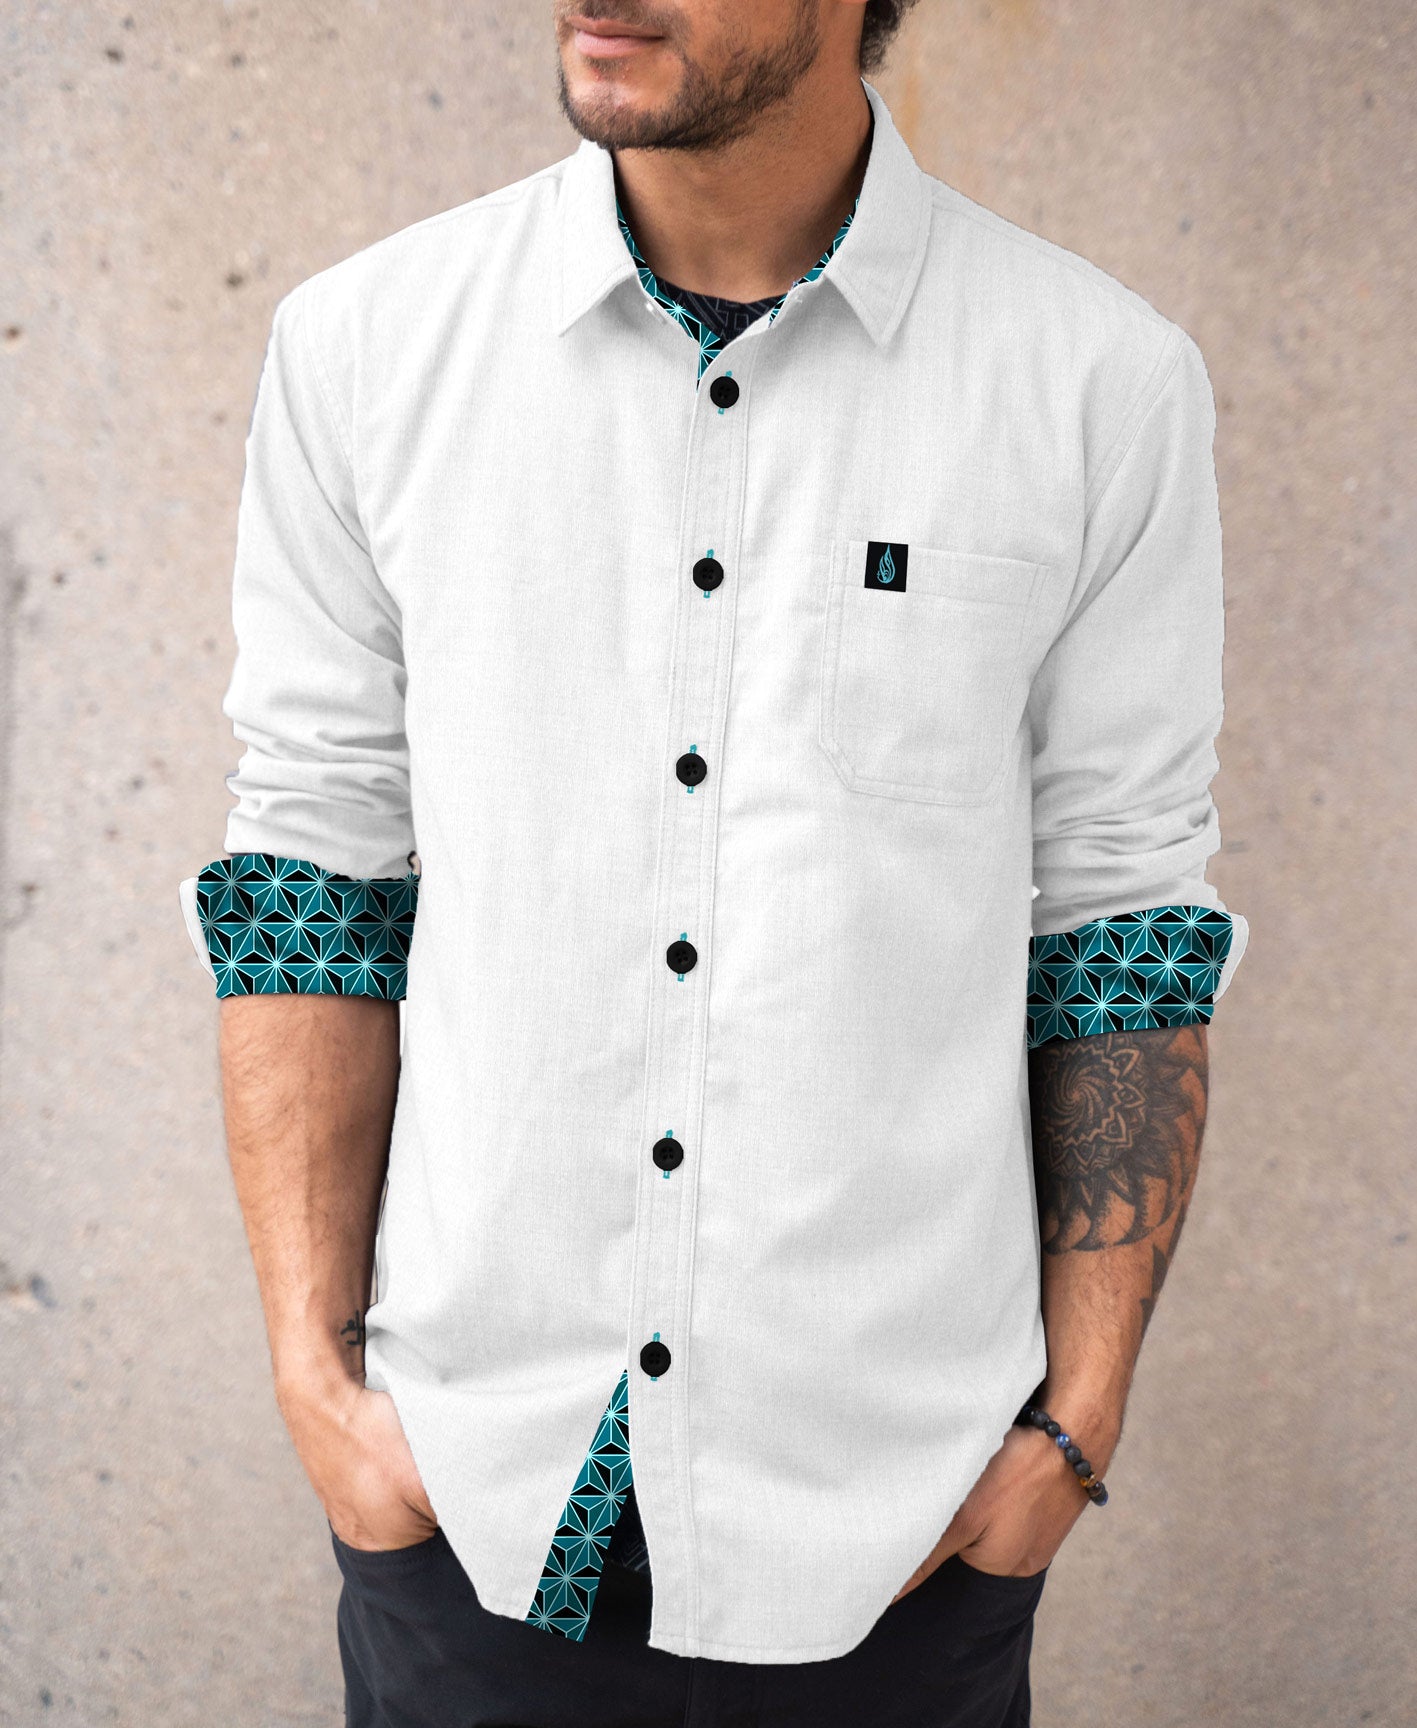 Northern Lights Lined Button Down Shirt by Threyda